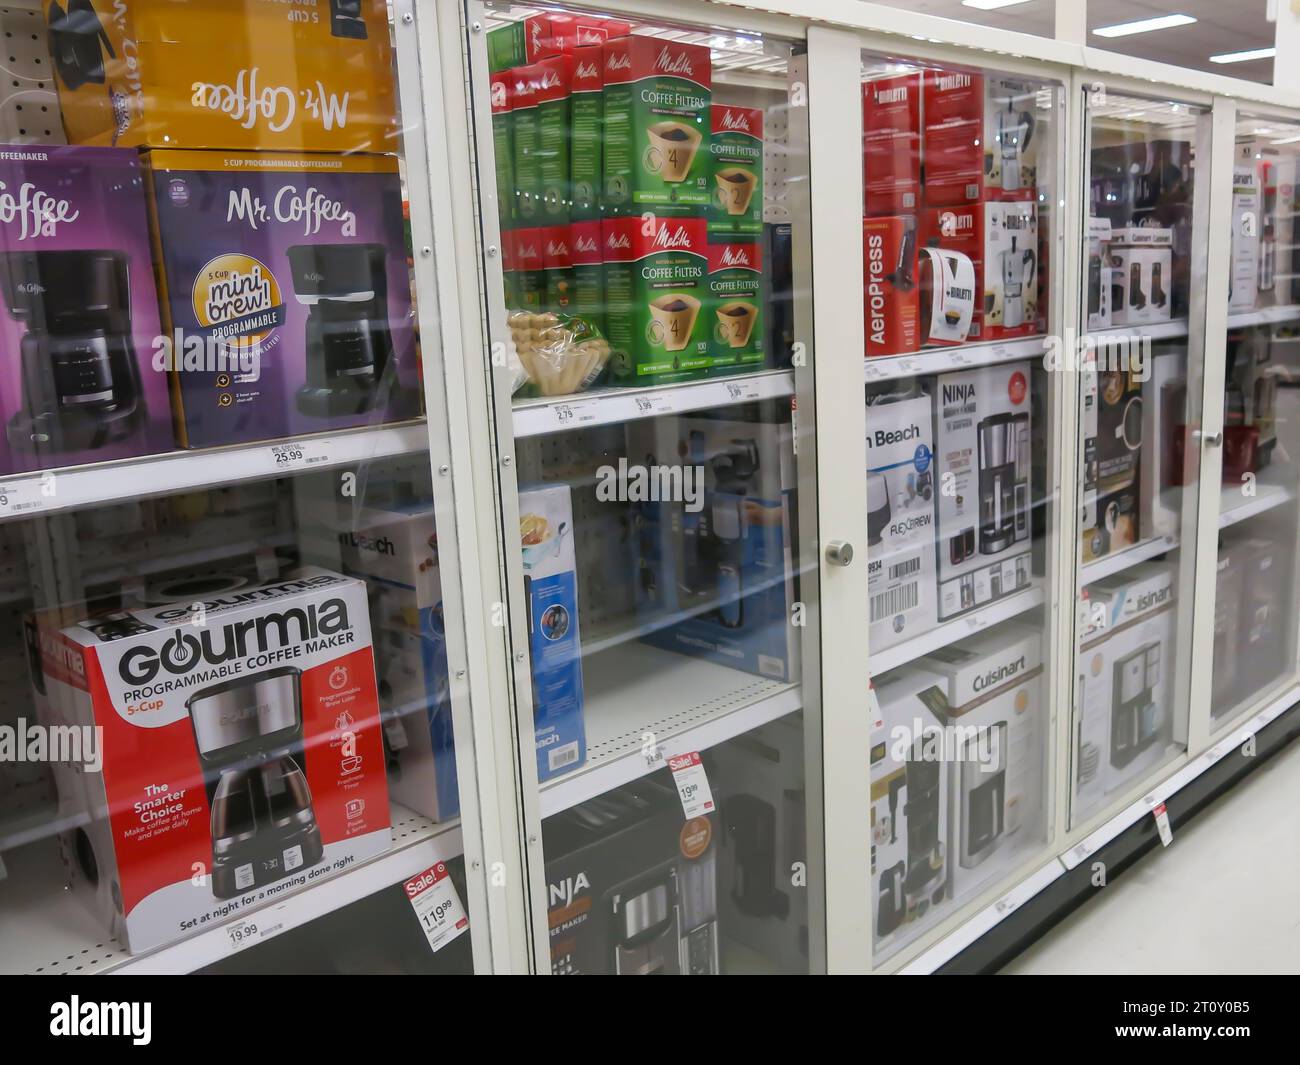 Locked Cabinets in Retail Store to Deter Shoplifting - Small Household Appliances Stock Photo